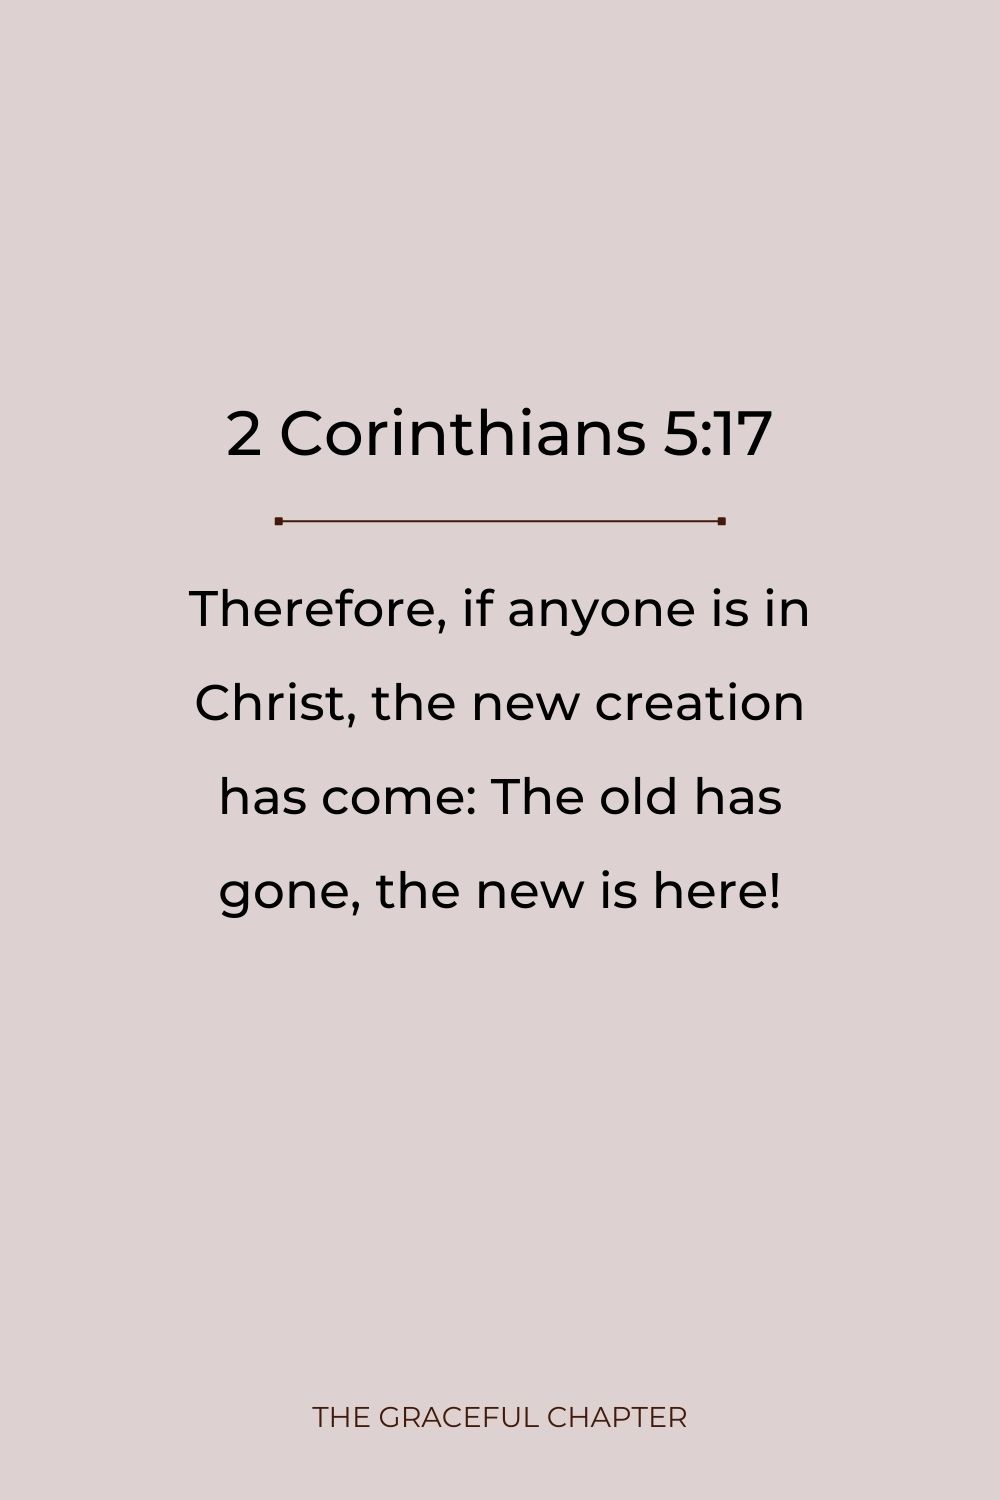 Therefore, if anyone is in Christ, the new creation has come: The old has gone, the new is here! 2 Corinthians 5:17